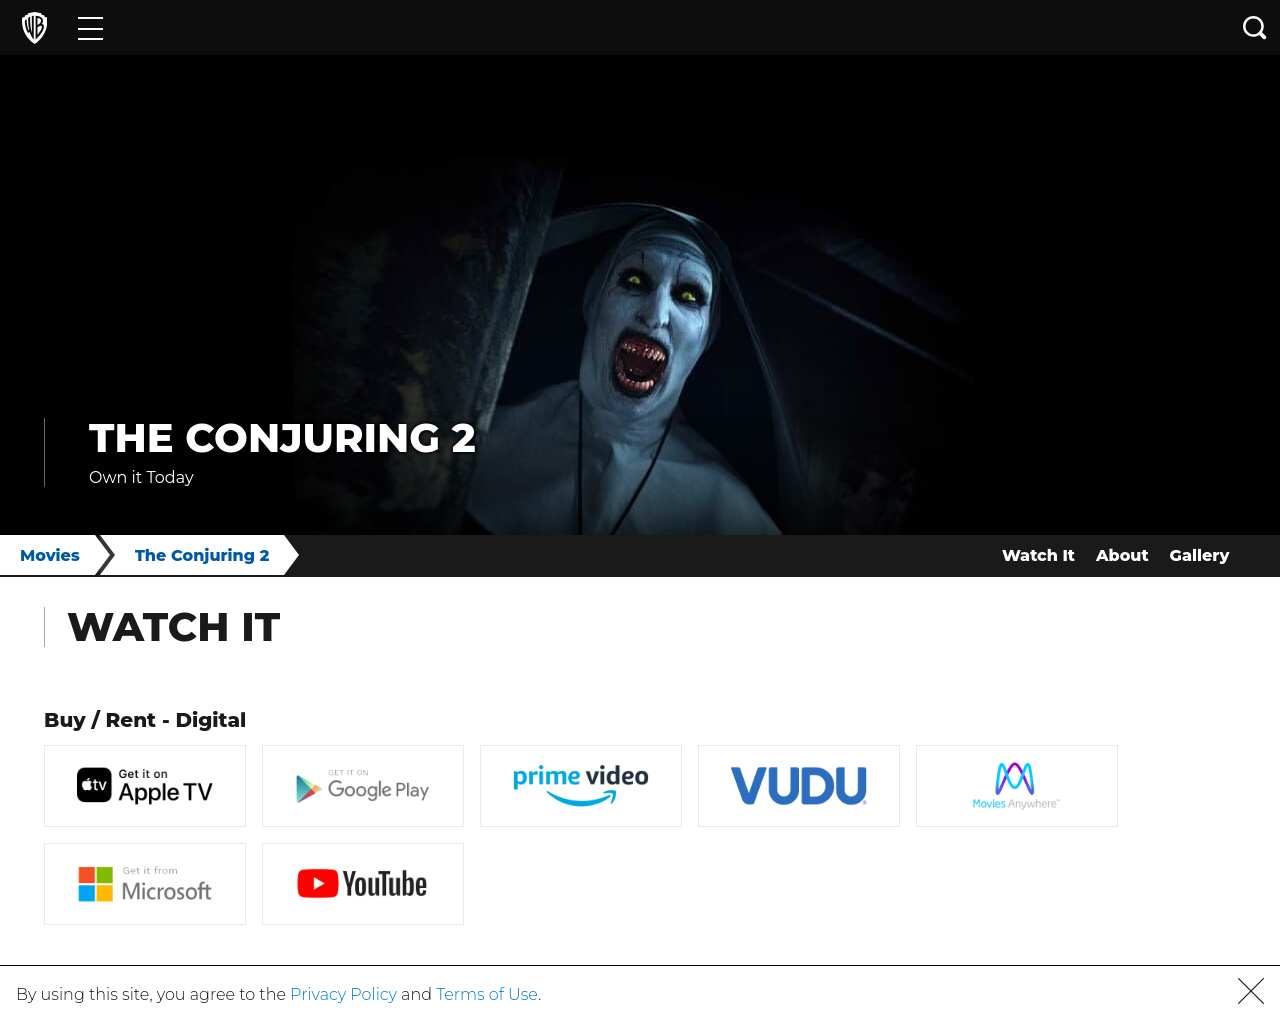 theconjuring2.com